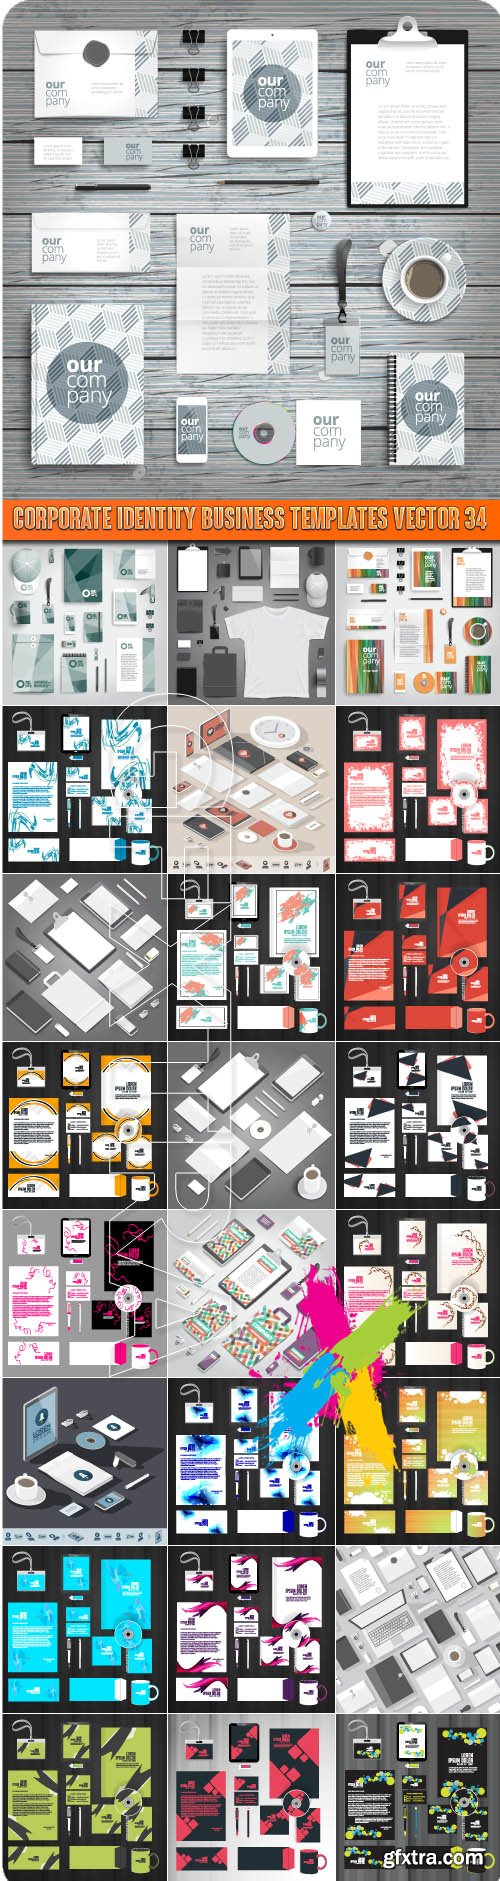 Corporate identity business templates vector 34